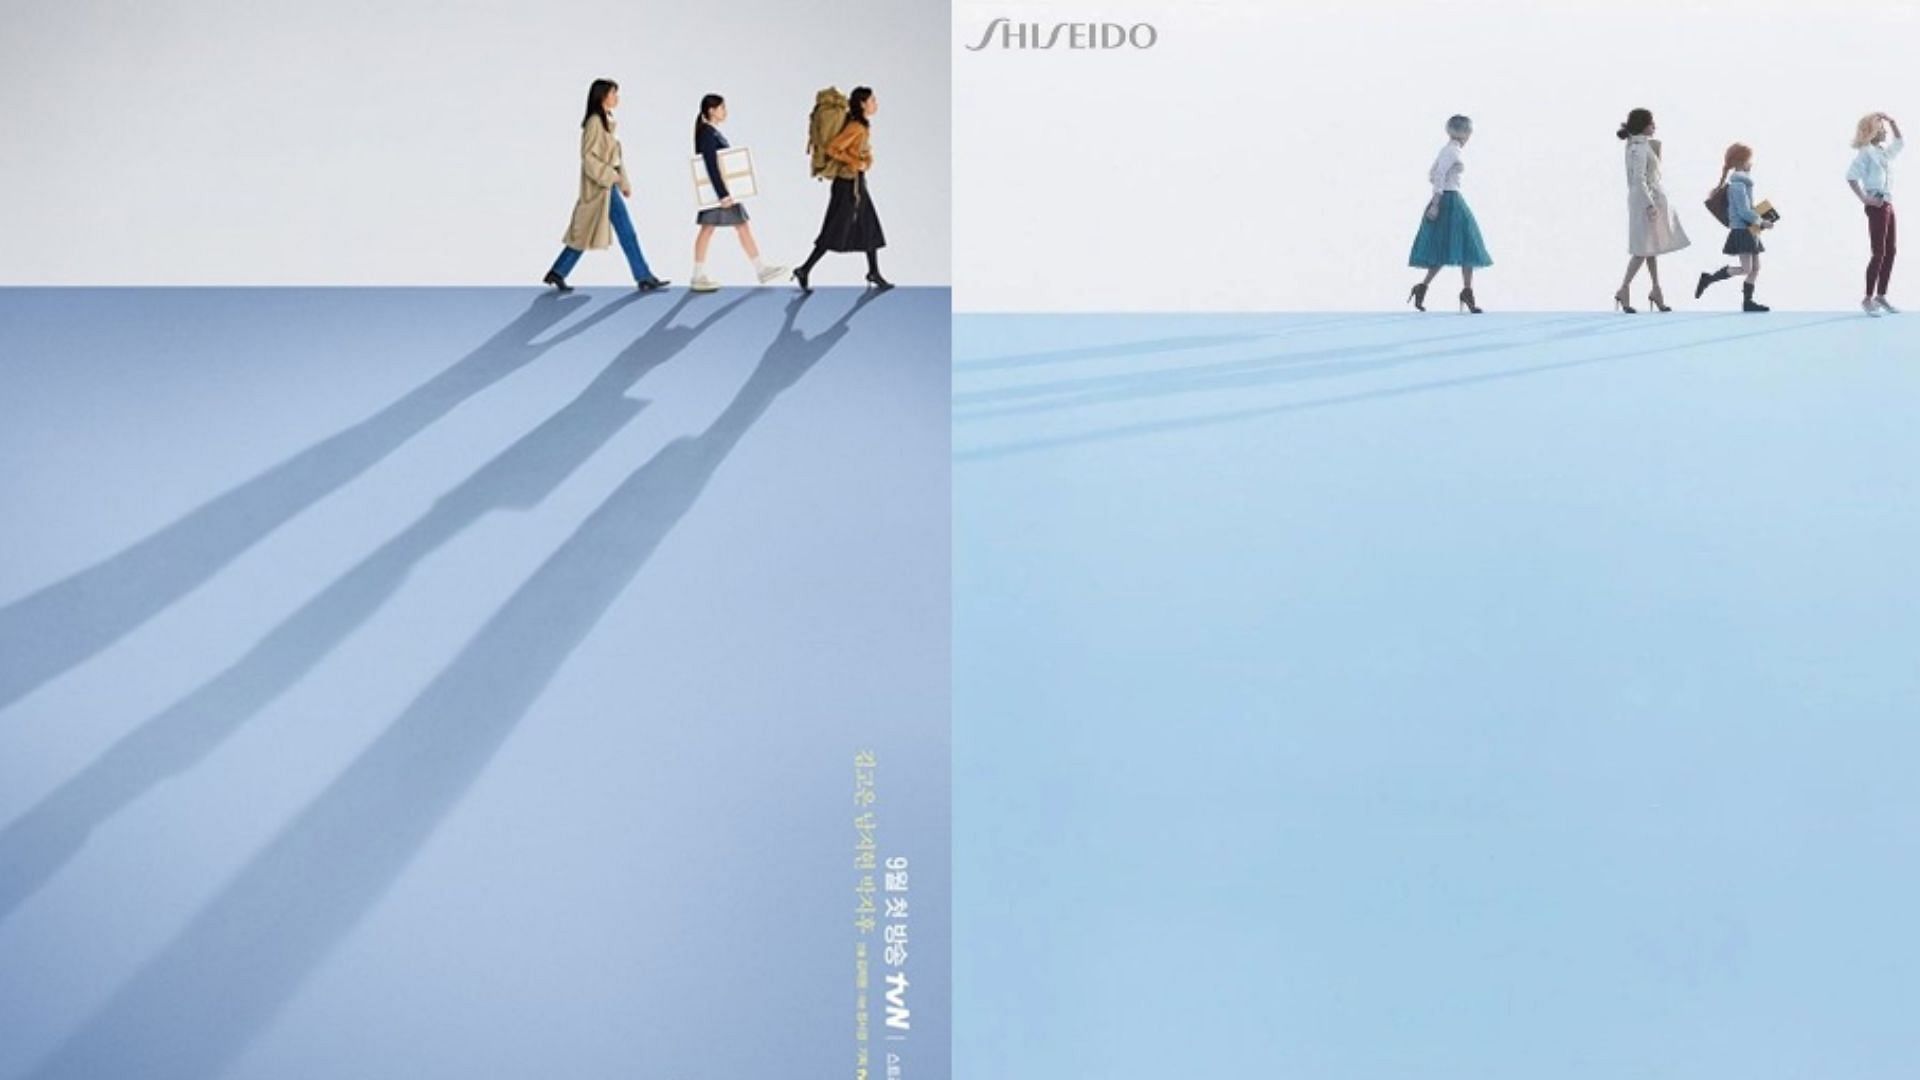 A comparison between Little Women poster and Shiseido poster (Image via tvn_drama/Shiseido, Instagram)